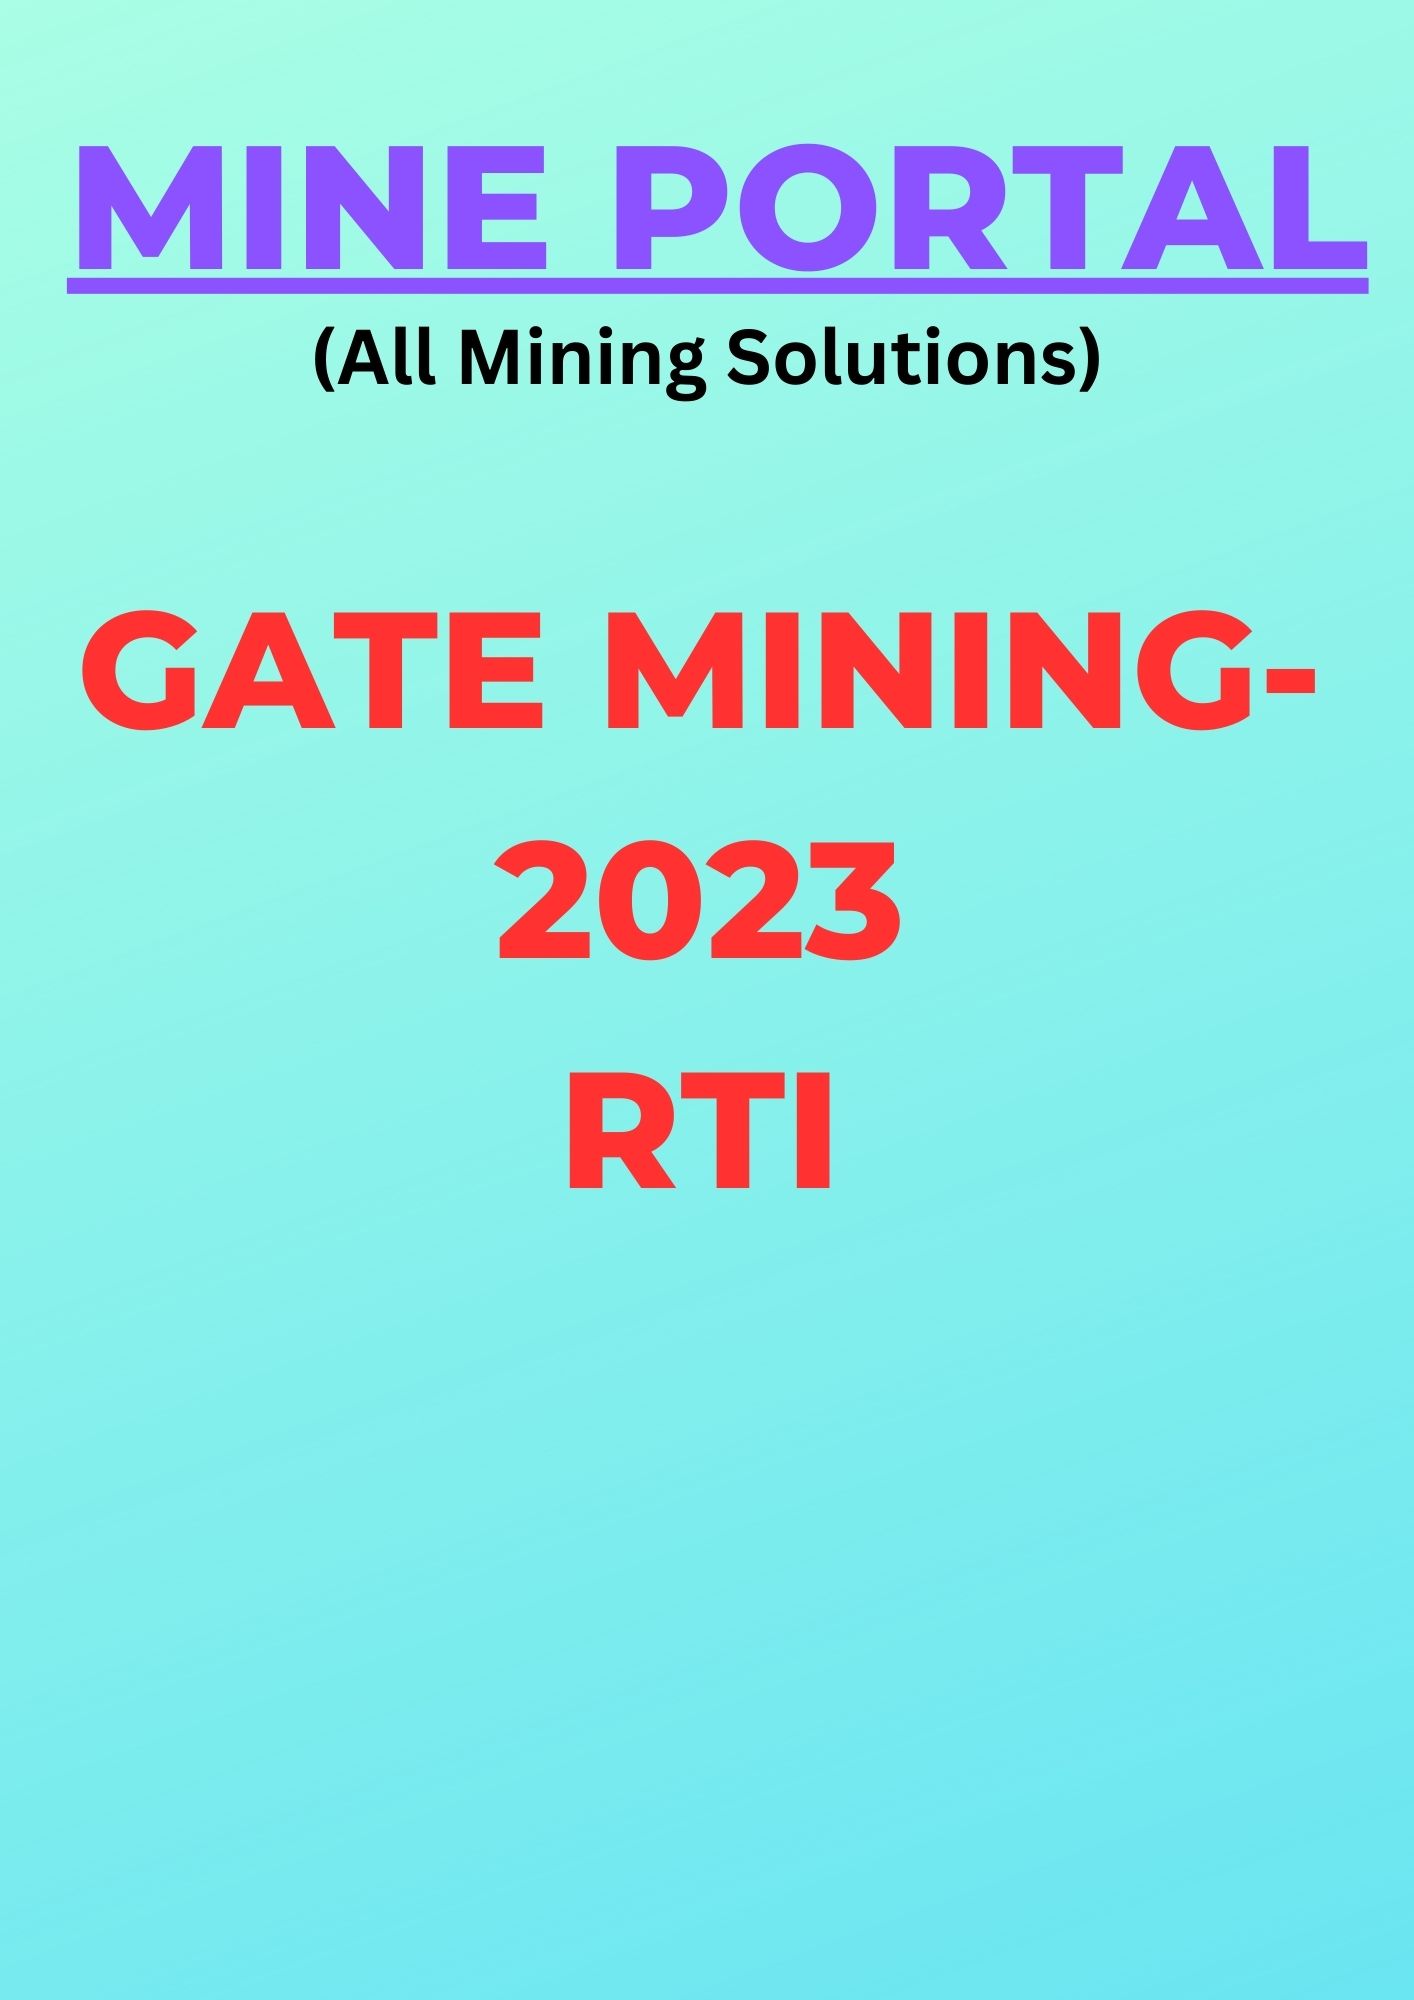 GATE MINING 2023 QUALIFIED CATEGORYWISE